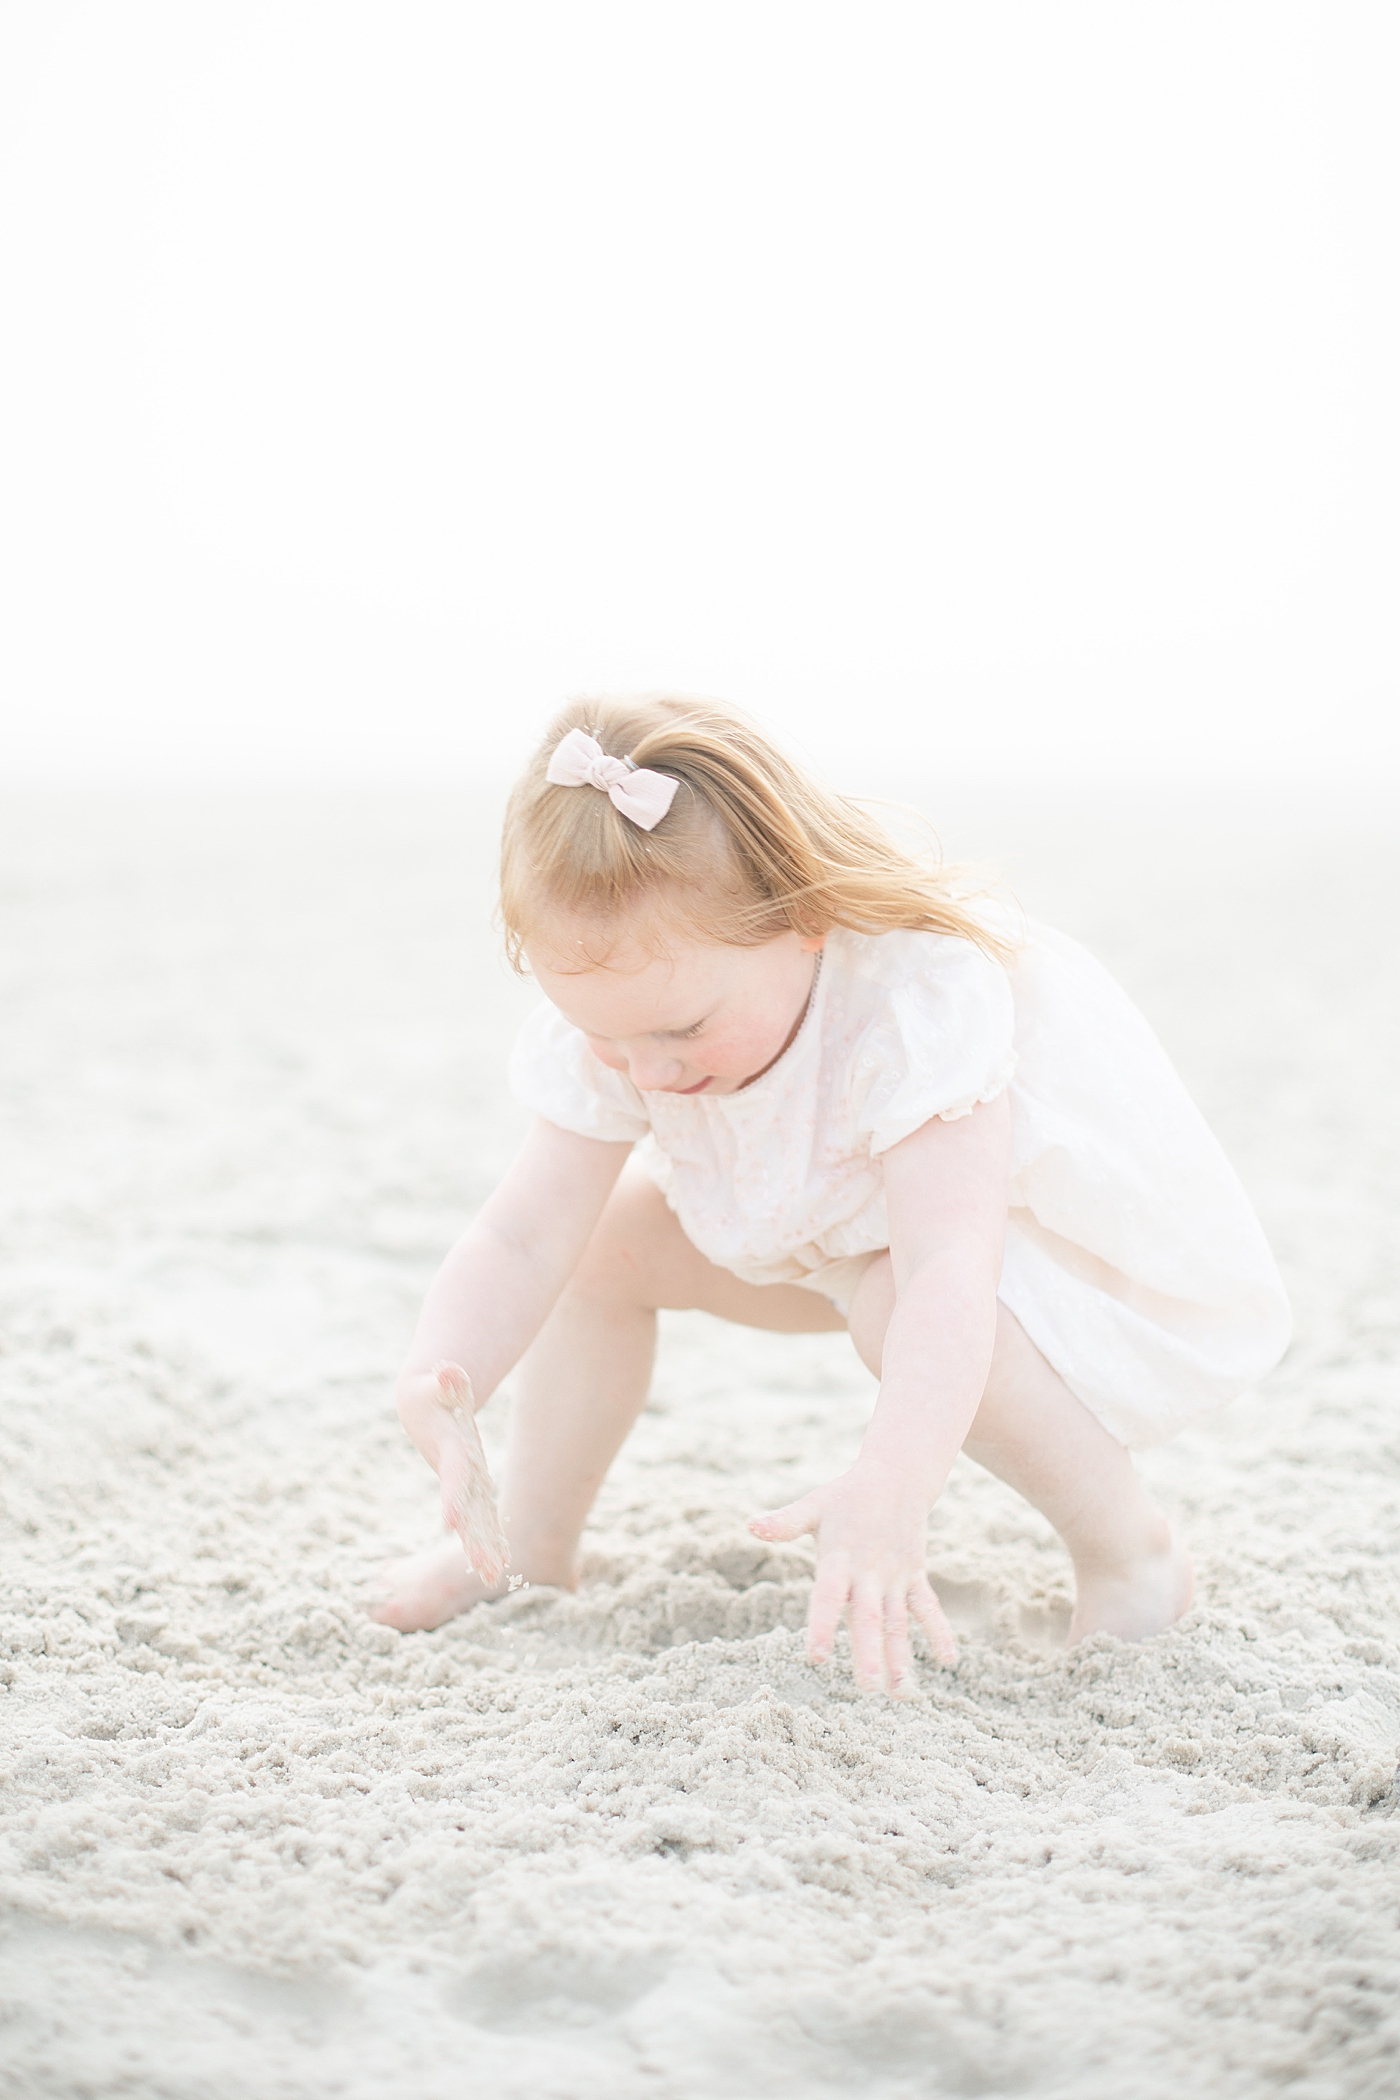 Toddler playing in the sand on the beach on the MS Gulf Coast. Photo by Little Sunshine Photography.